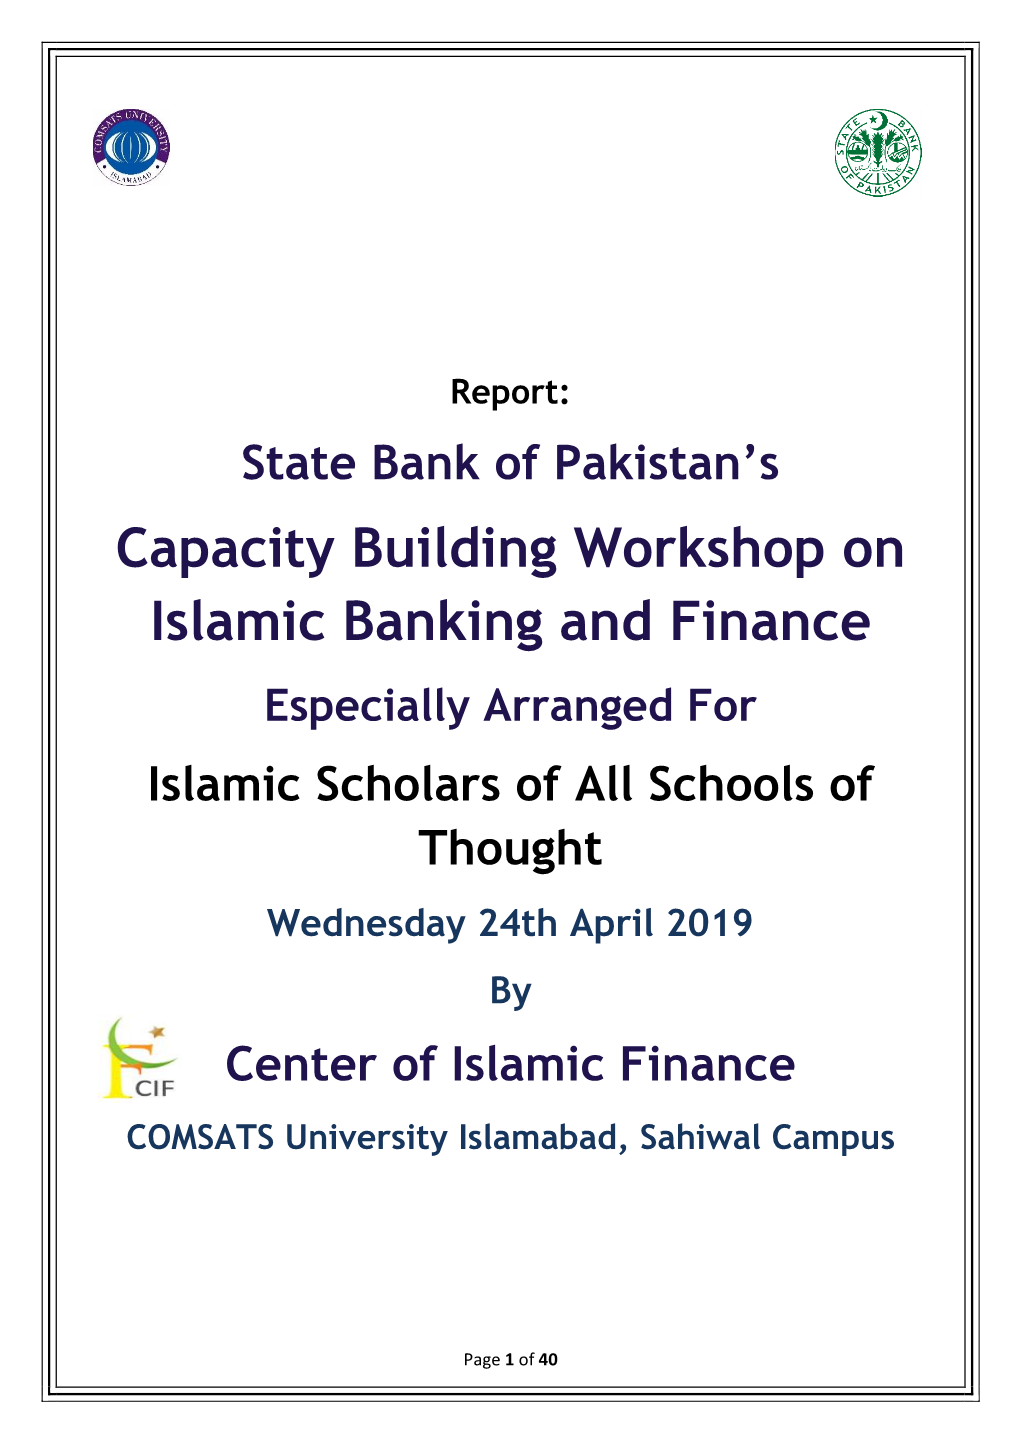 Report of Capacity Building Workshop on Islamic Banking and Finance